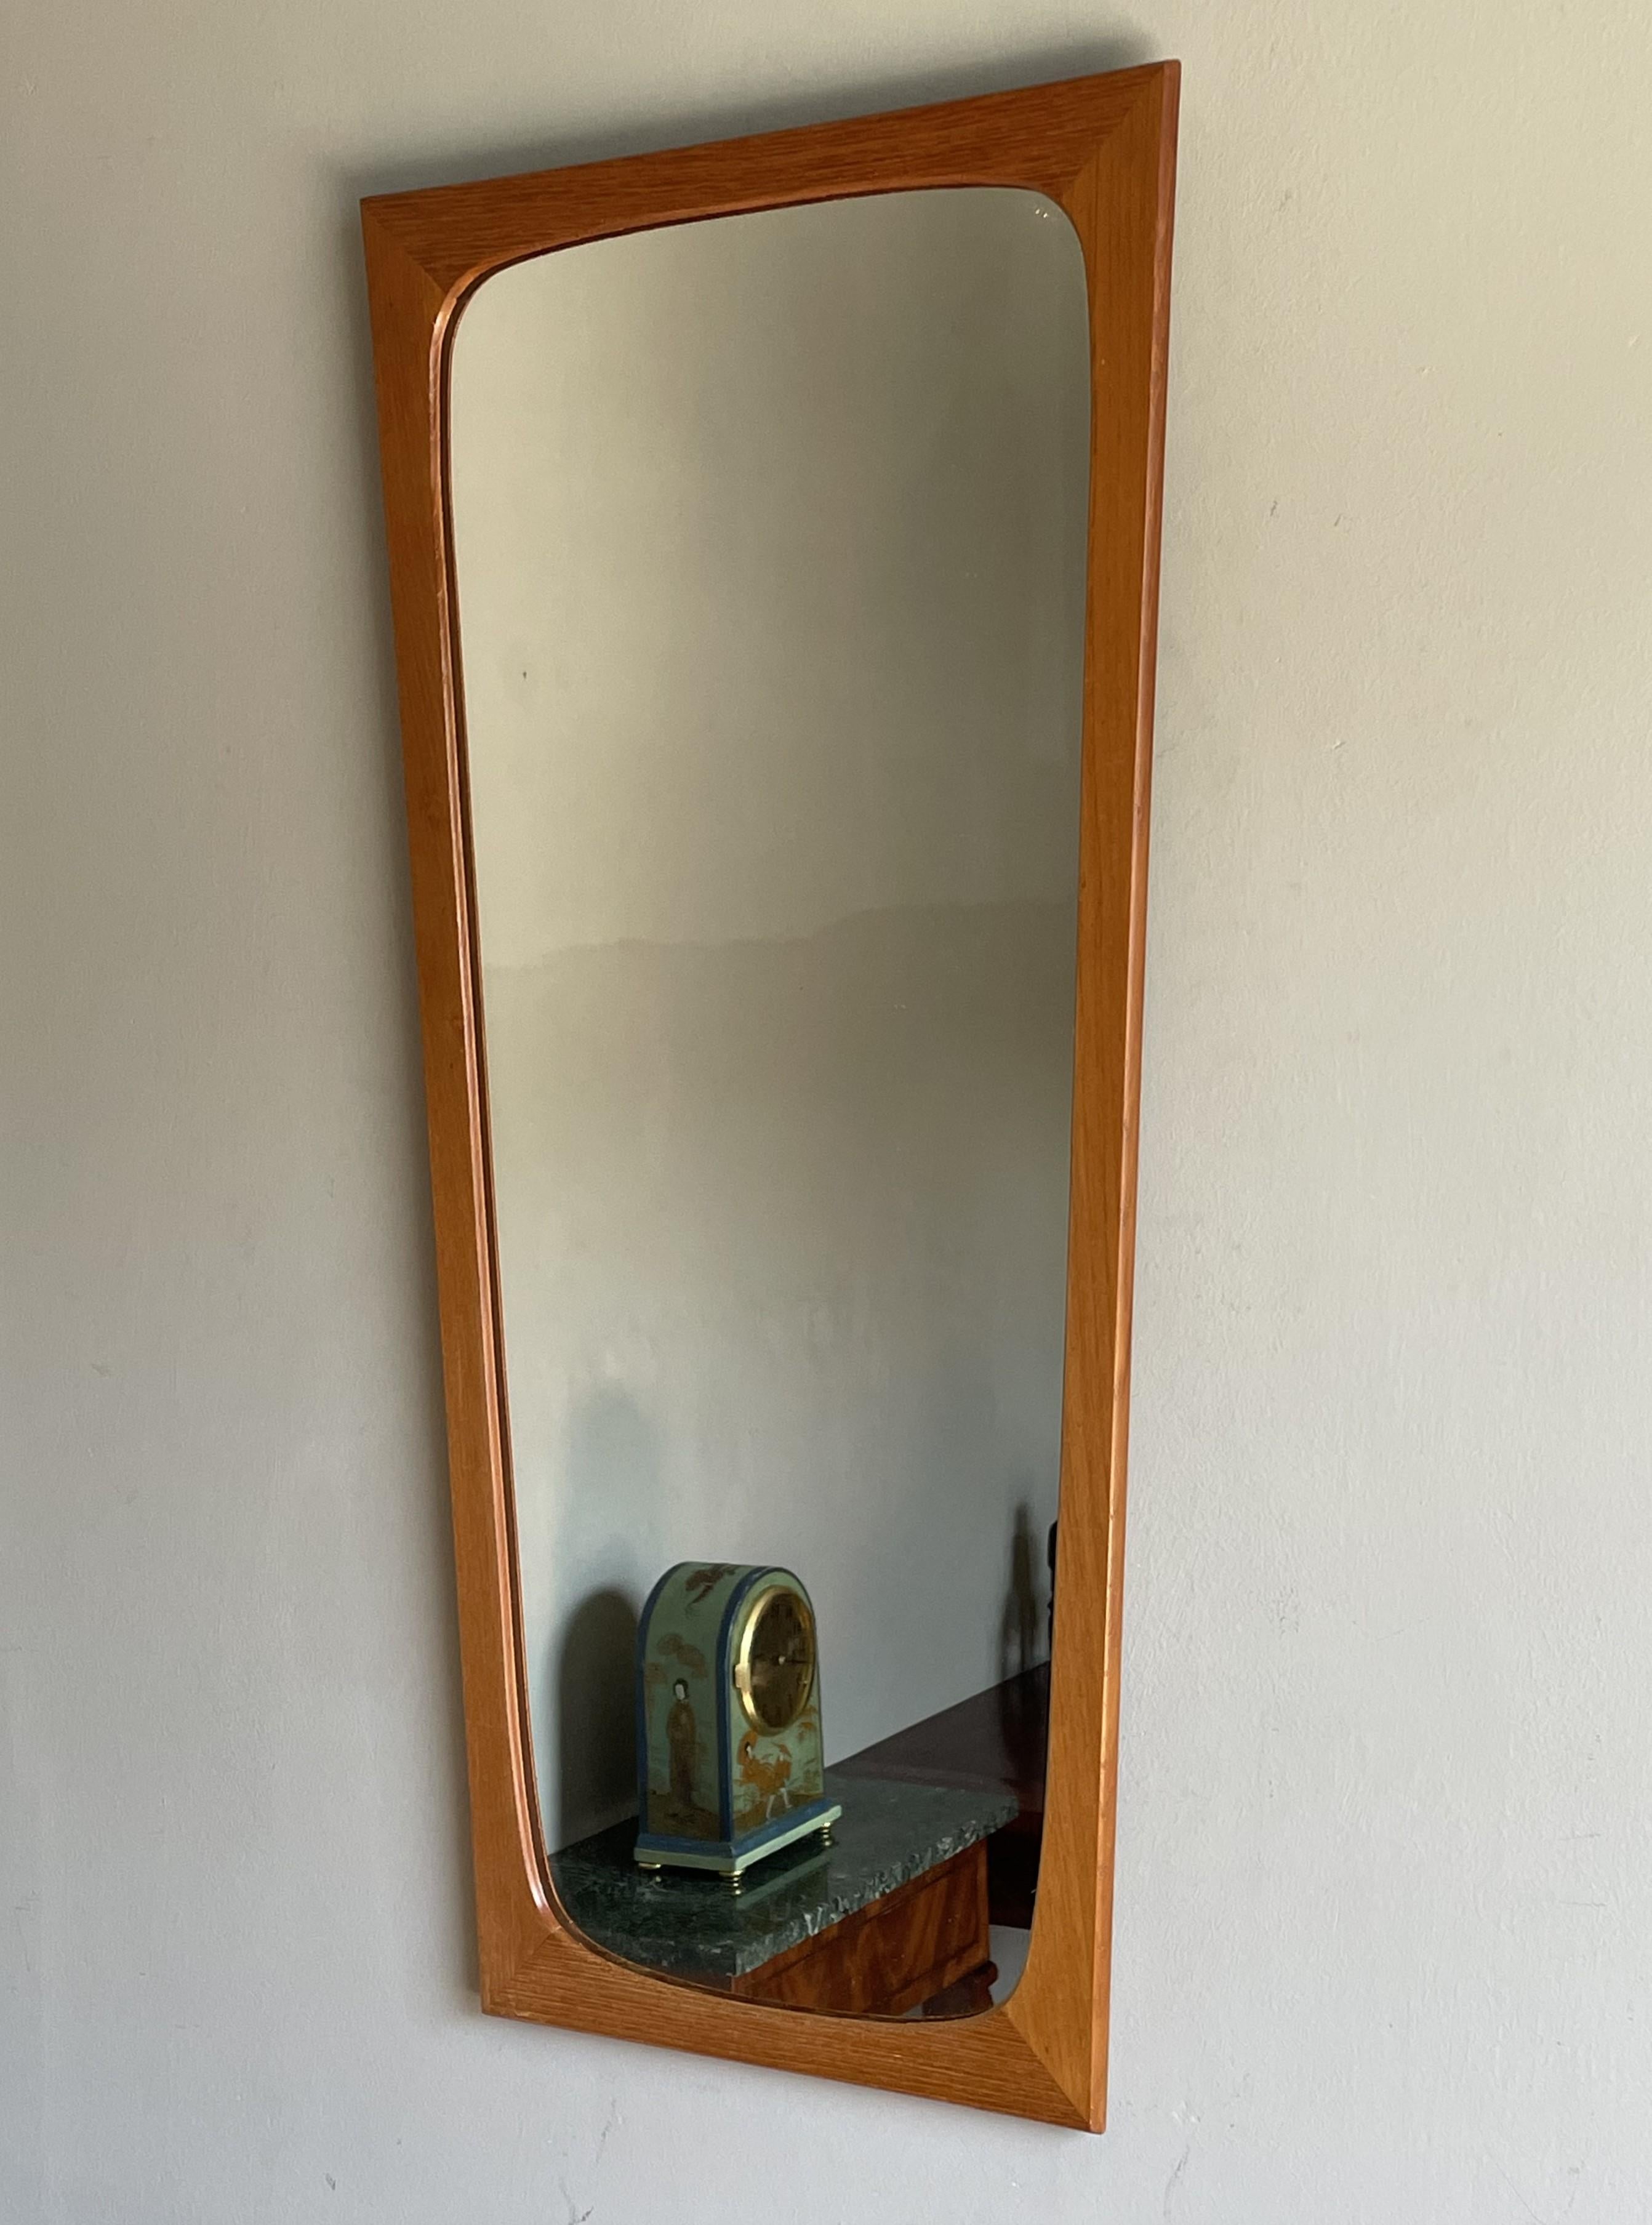 Rare Mid-Century Modern Wall / Make Up Mirror in Superb Teak Wooden Frame 1960s For Sale 3